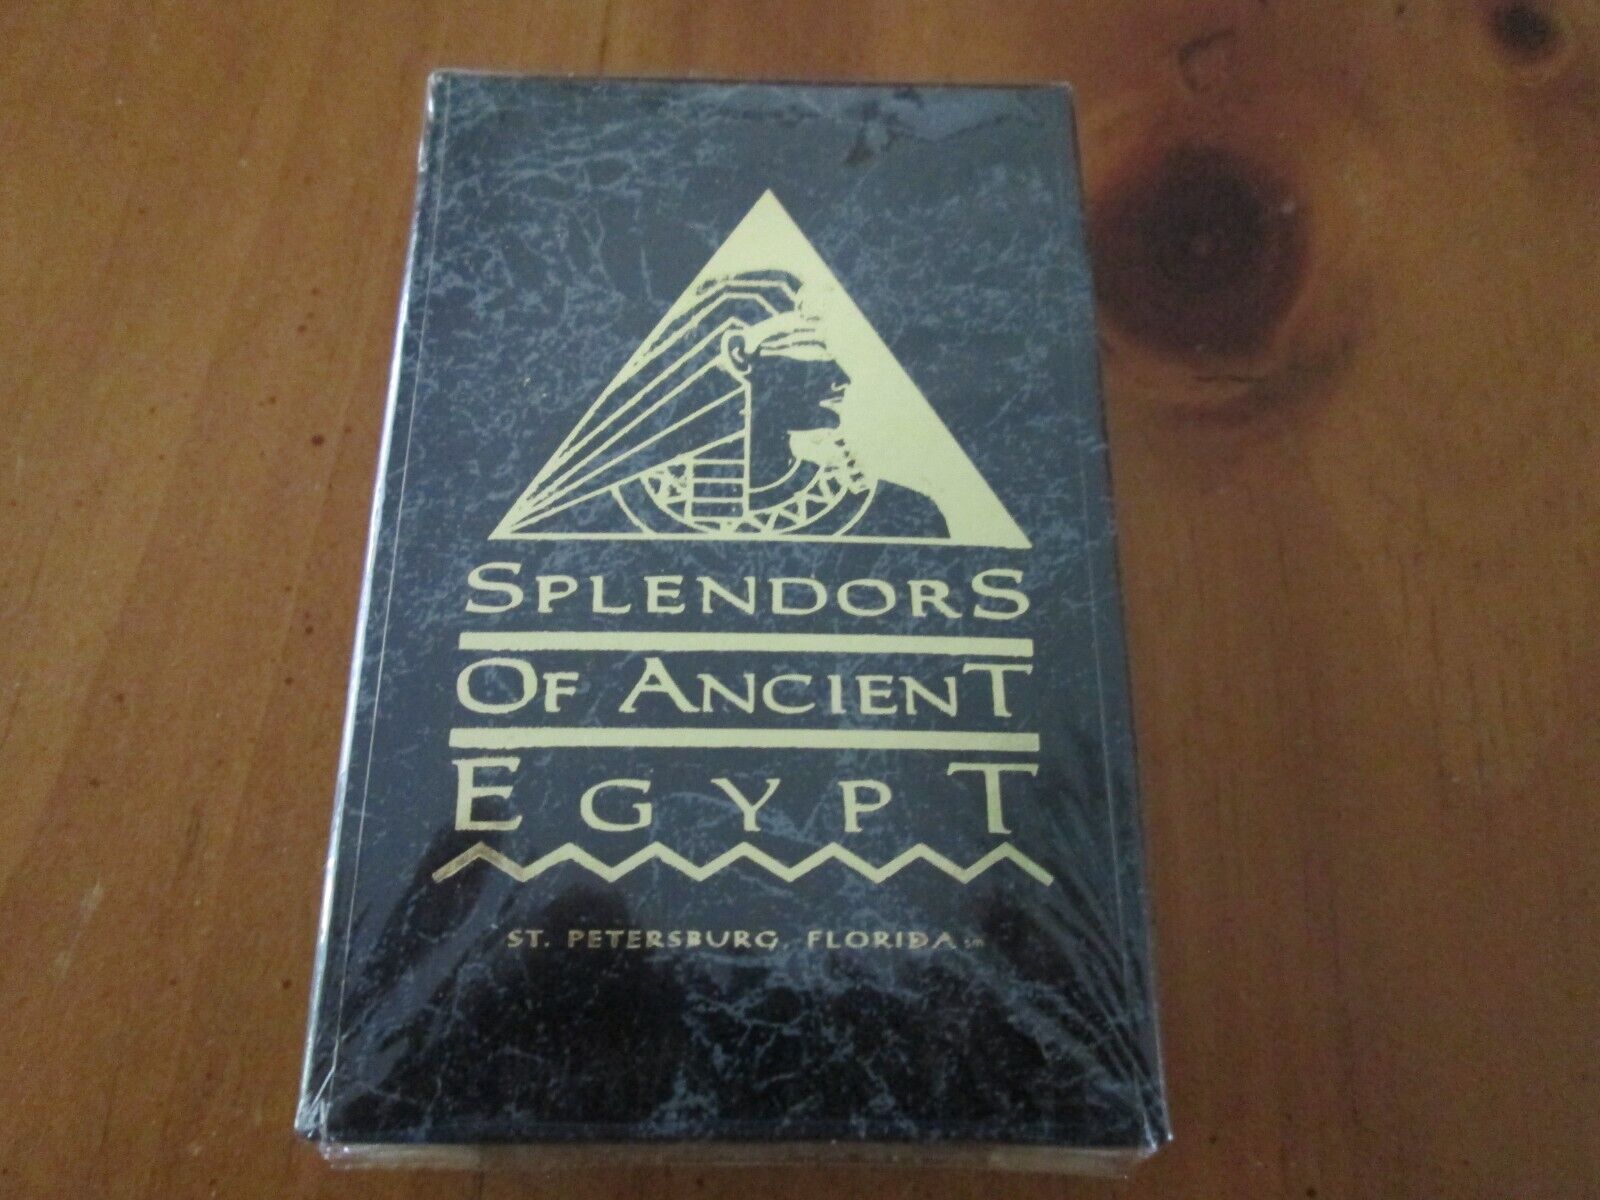 NEW Vintage Splendors of Ancient Egypt Playing Cards Deck Florida Art SEALED